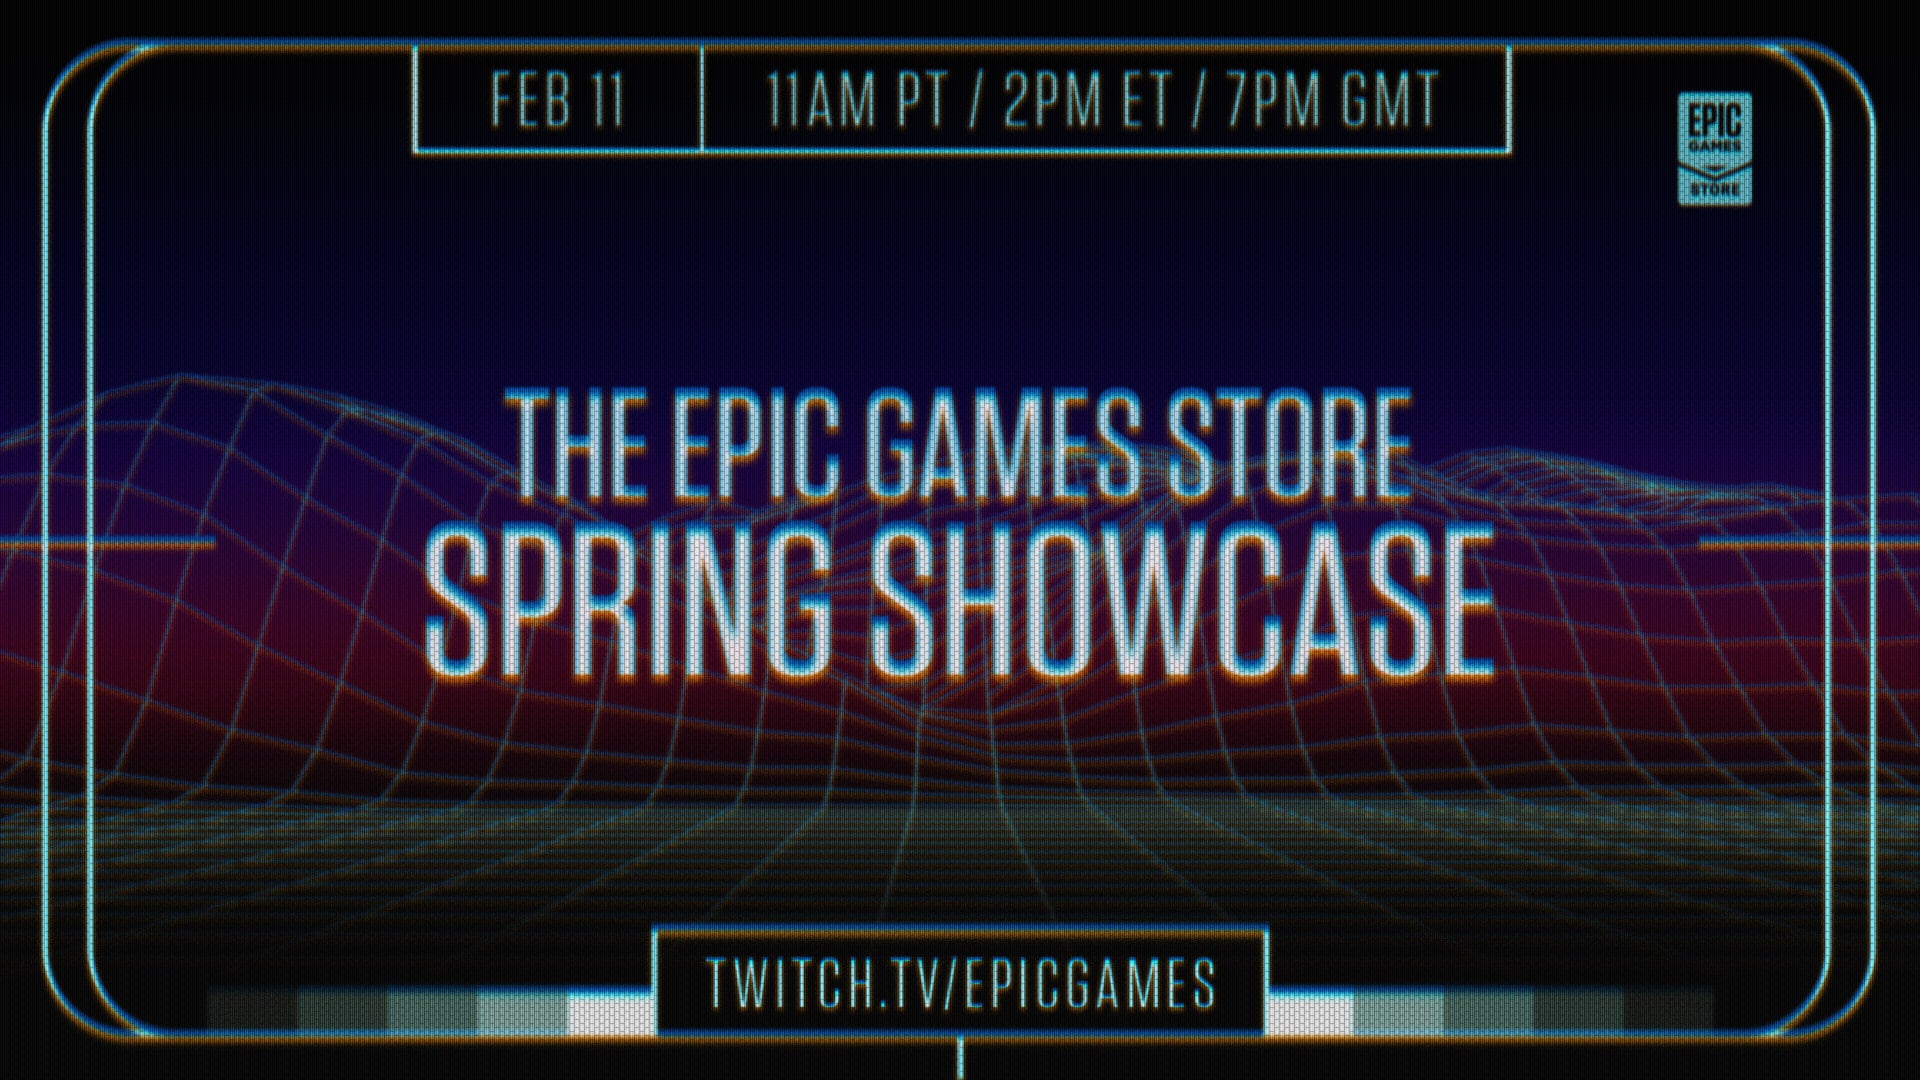 A banner with dates and times for the Epic Games Store Spring Showcase stream.